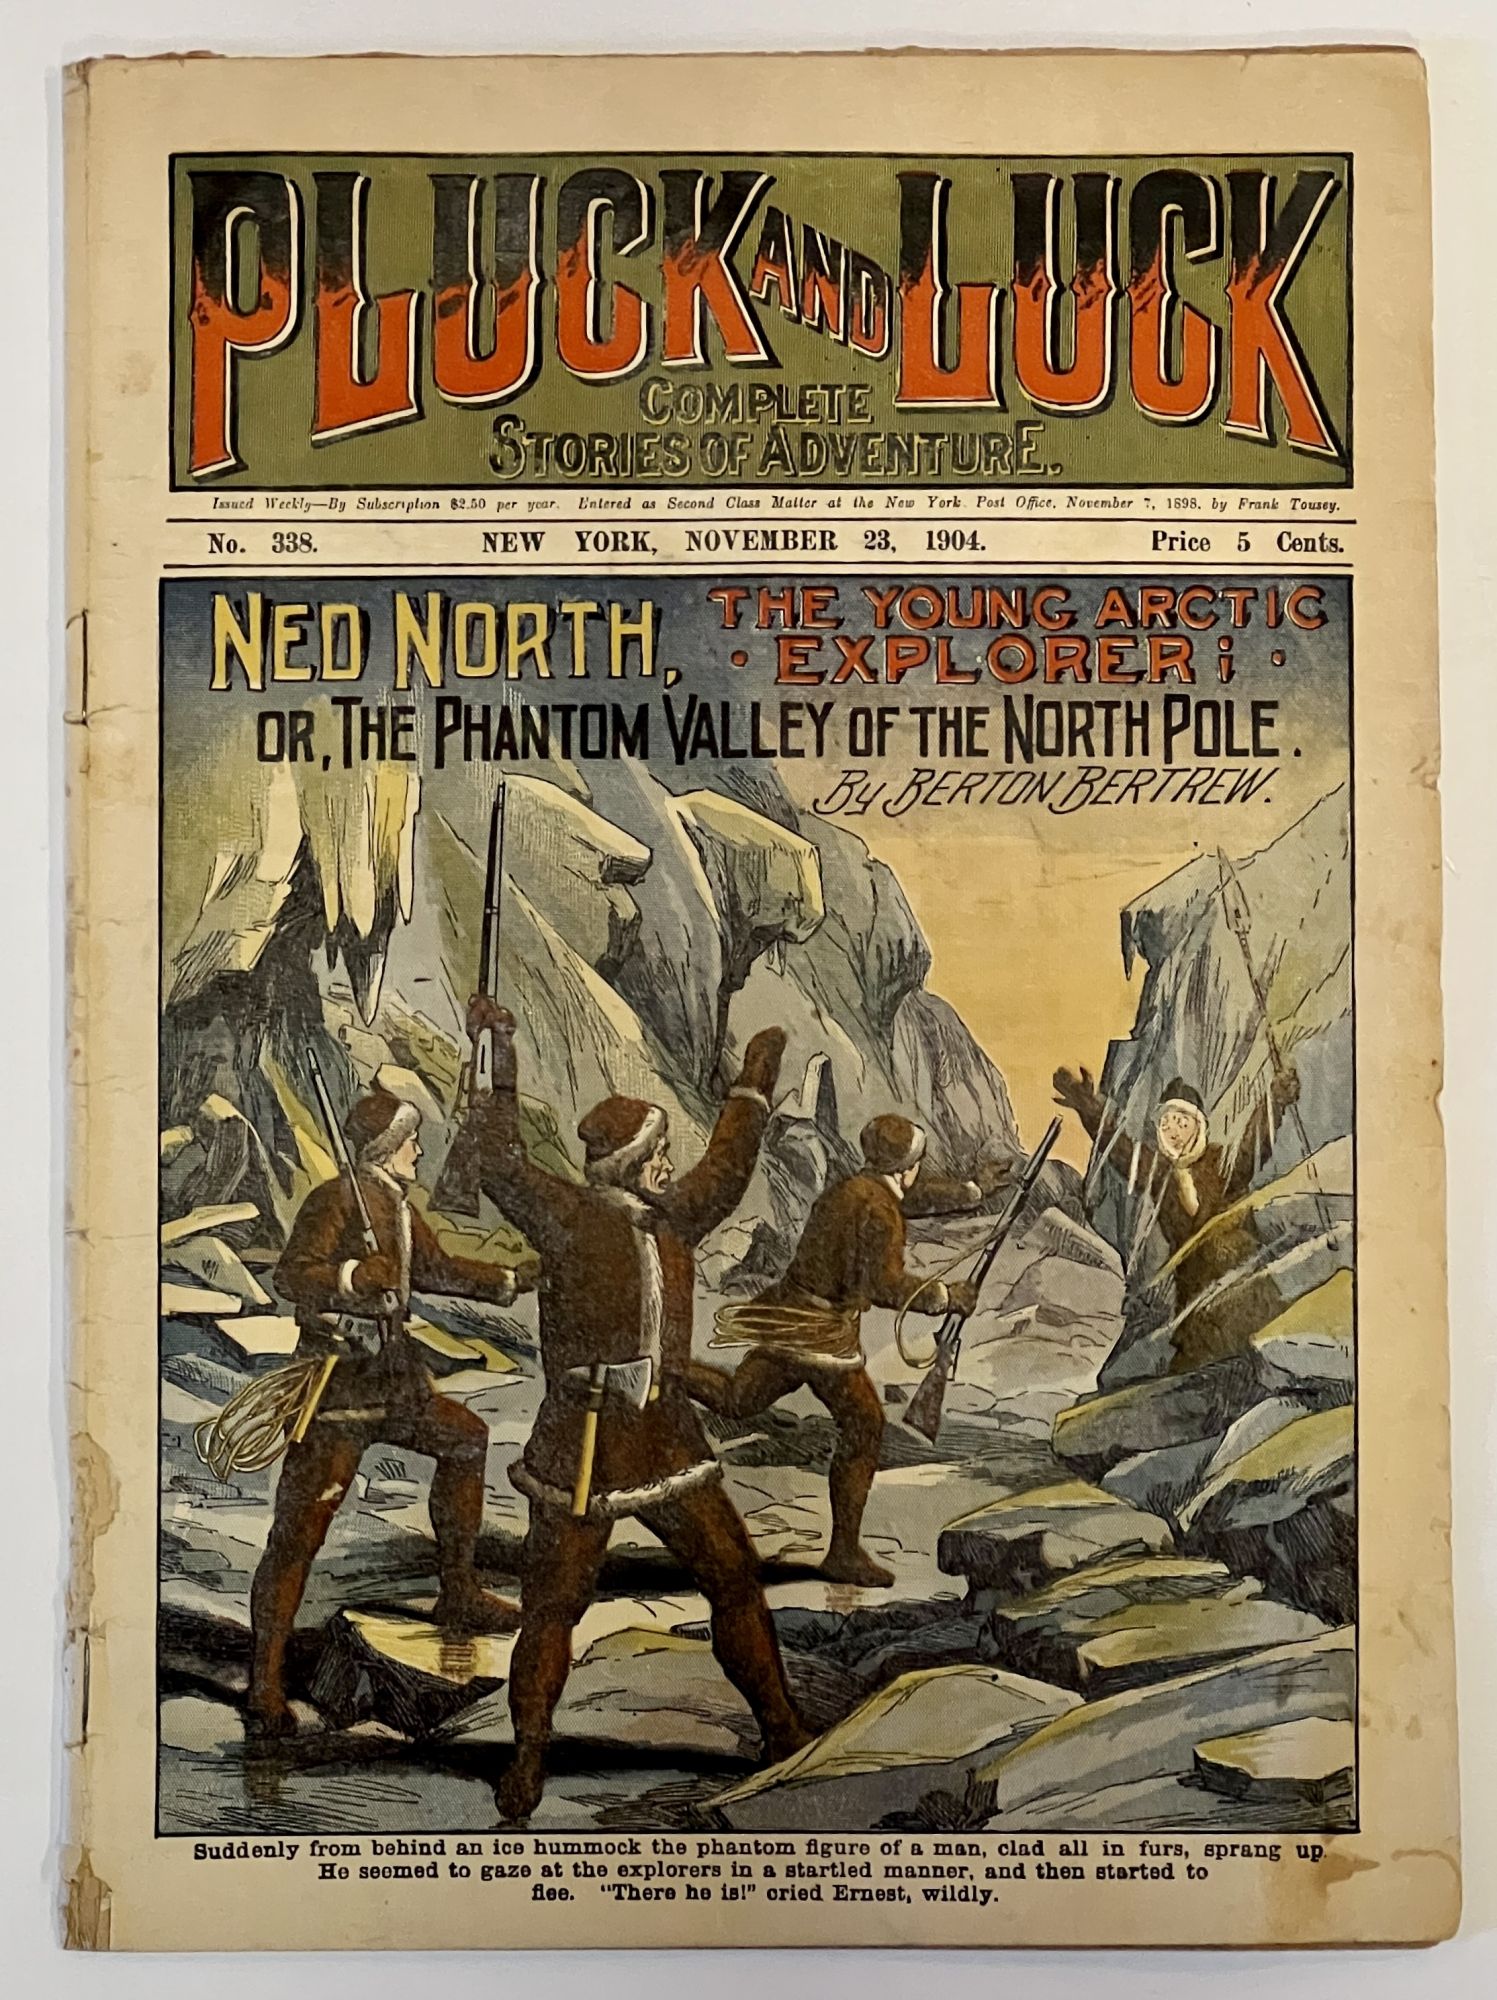 Bertrew, Berton [pseudonym of Doughty, Francis Worcester (d. 1917)]. - NED NORTH, The Young Arctic Explorer; or, The Phantom Valley of the North Pole. 